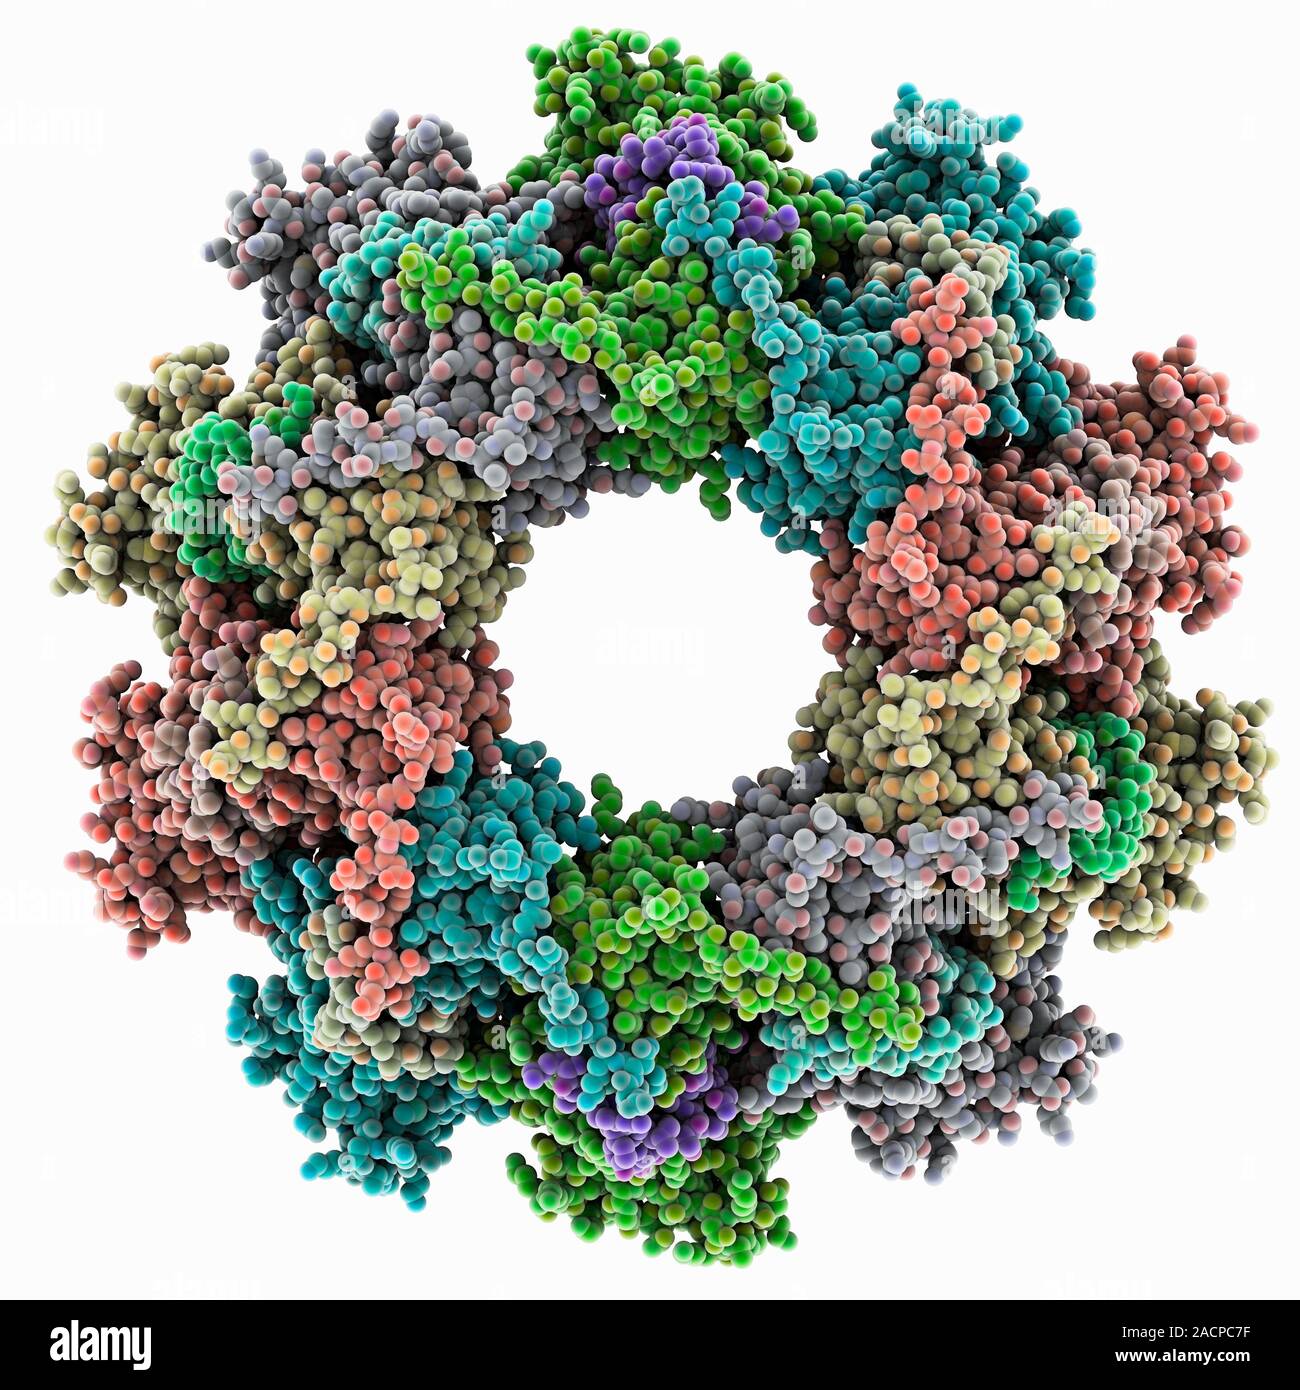 VSIV virus protein complex, molecular model. This decameric (10-part) circular structure is a complex of nucleoproteins (nucleocapsid protein) and pho Stock Photo